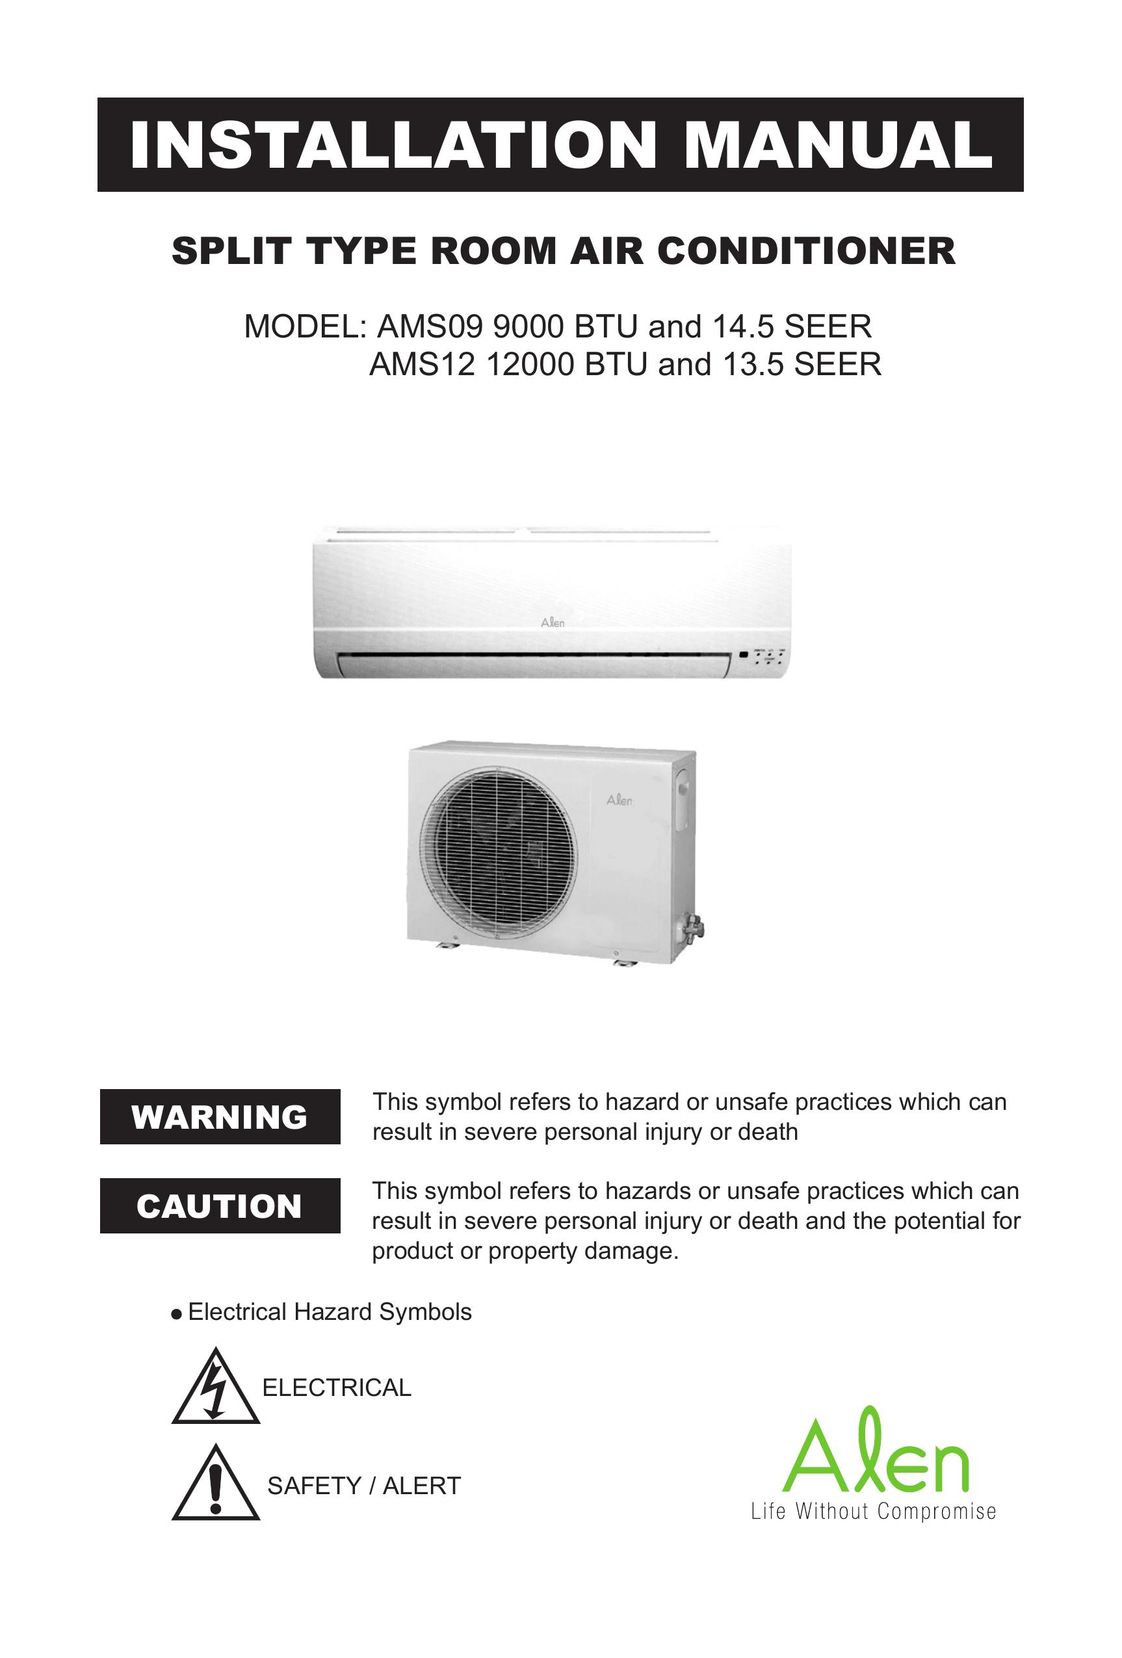 Alen AMS12 12000 BTU AND 13.5 SEER Double Oven User Manual